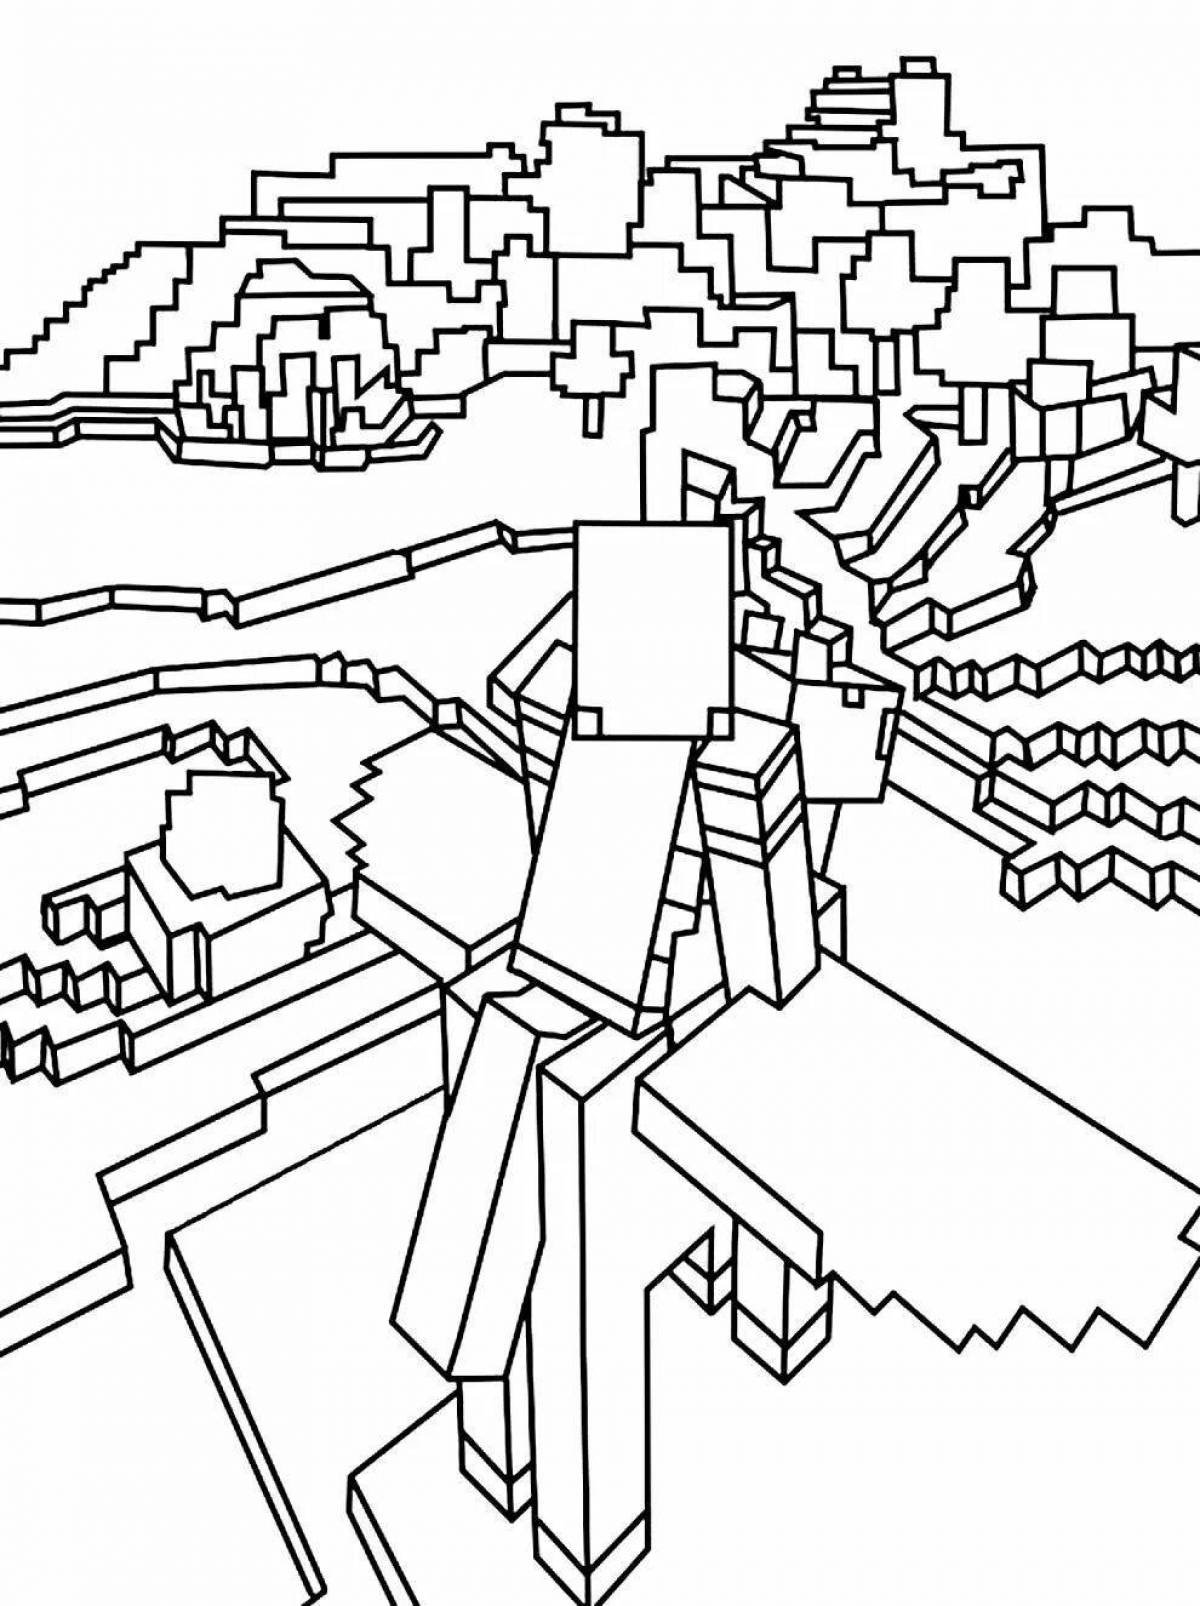 Great minecraft world coloring page